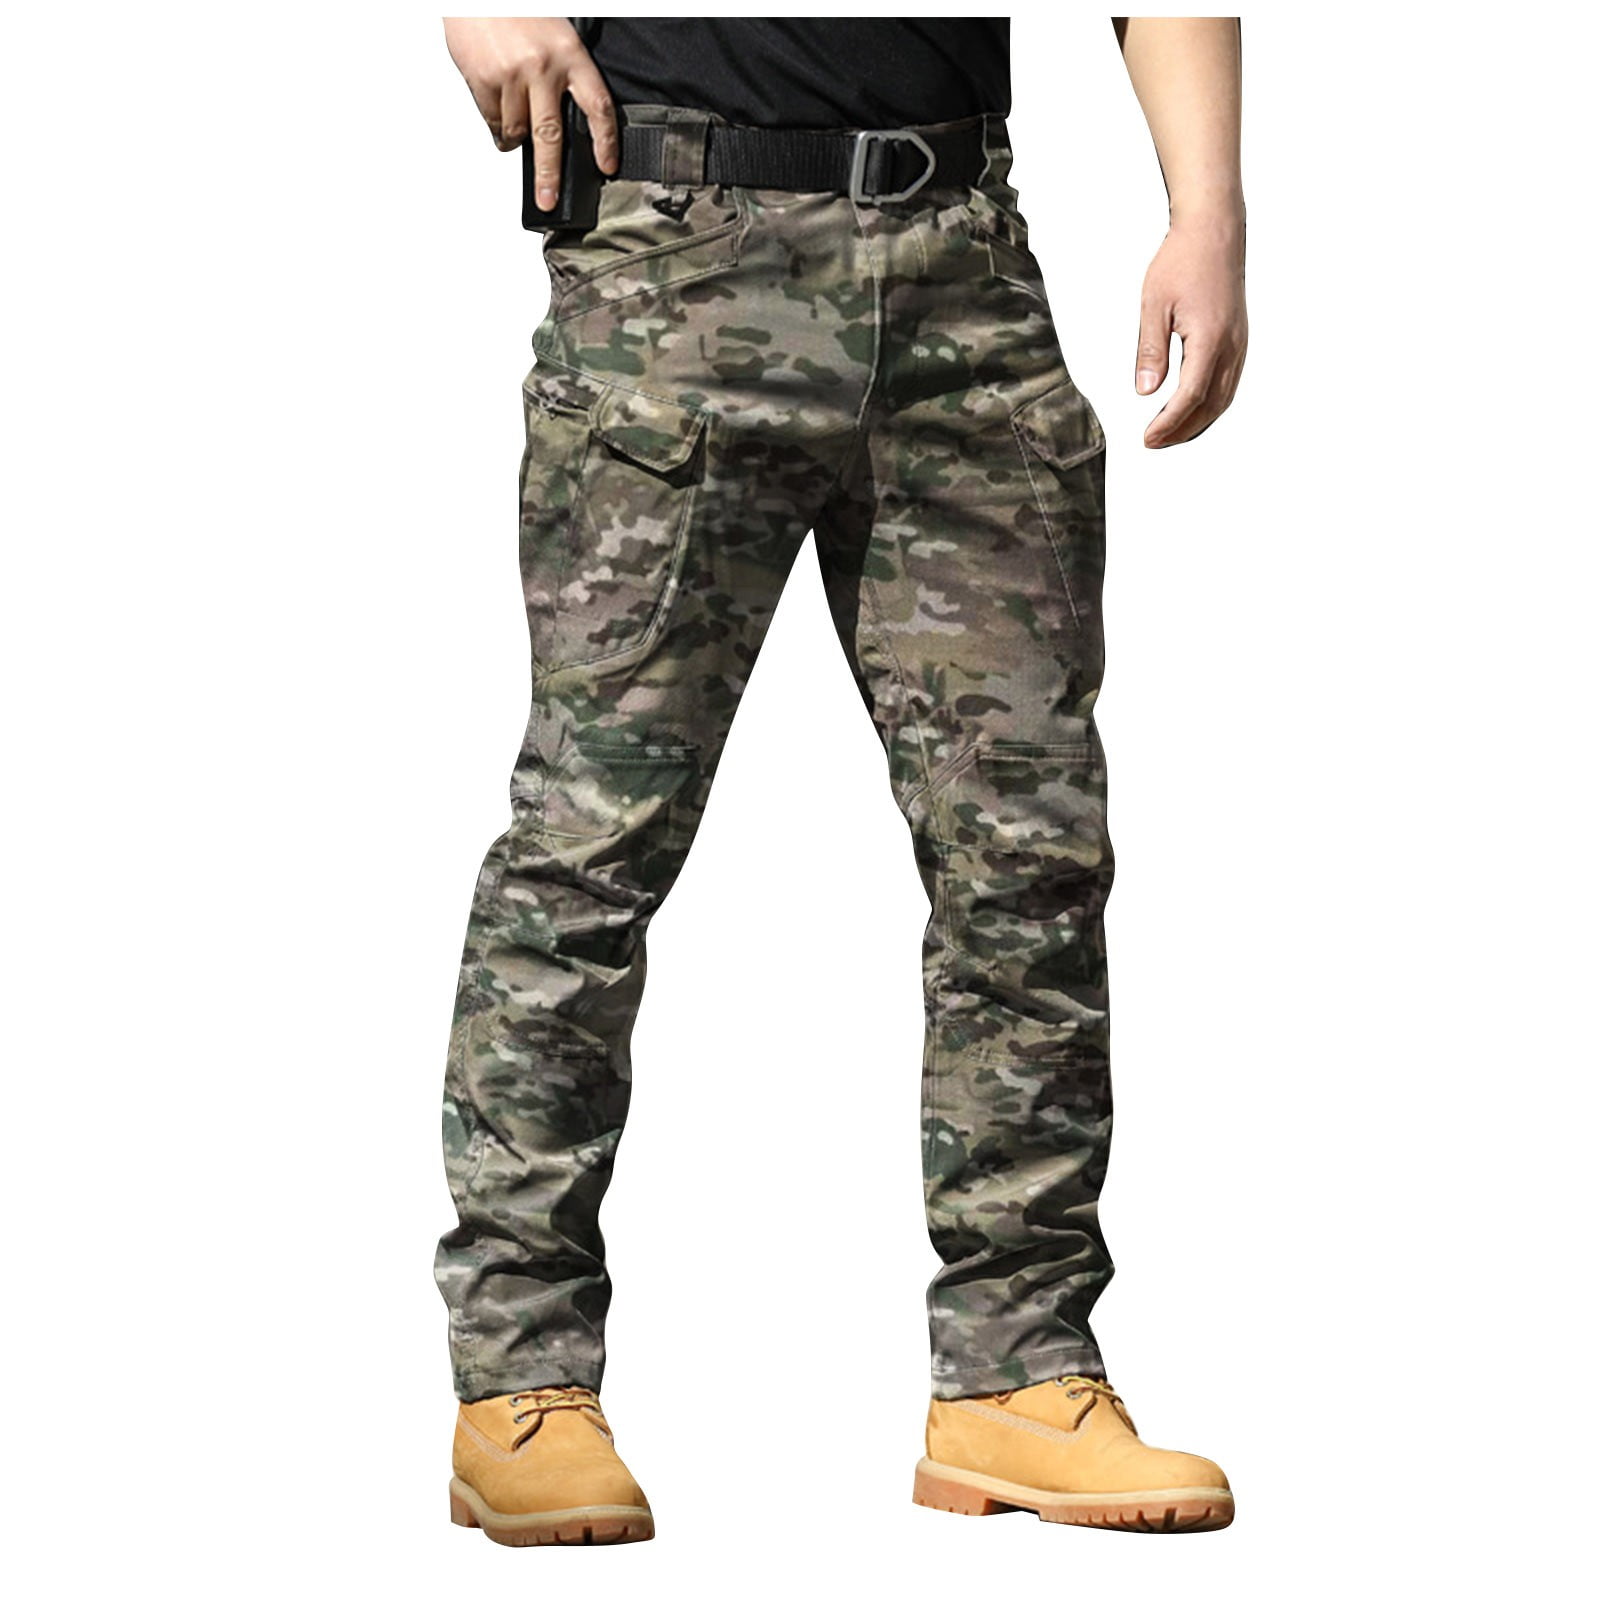 TQWQT Camo Cargo Pants for Men Relaxed Fit Cotton Casual Work Hiking ...